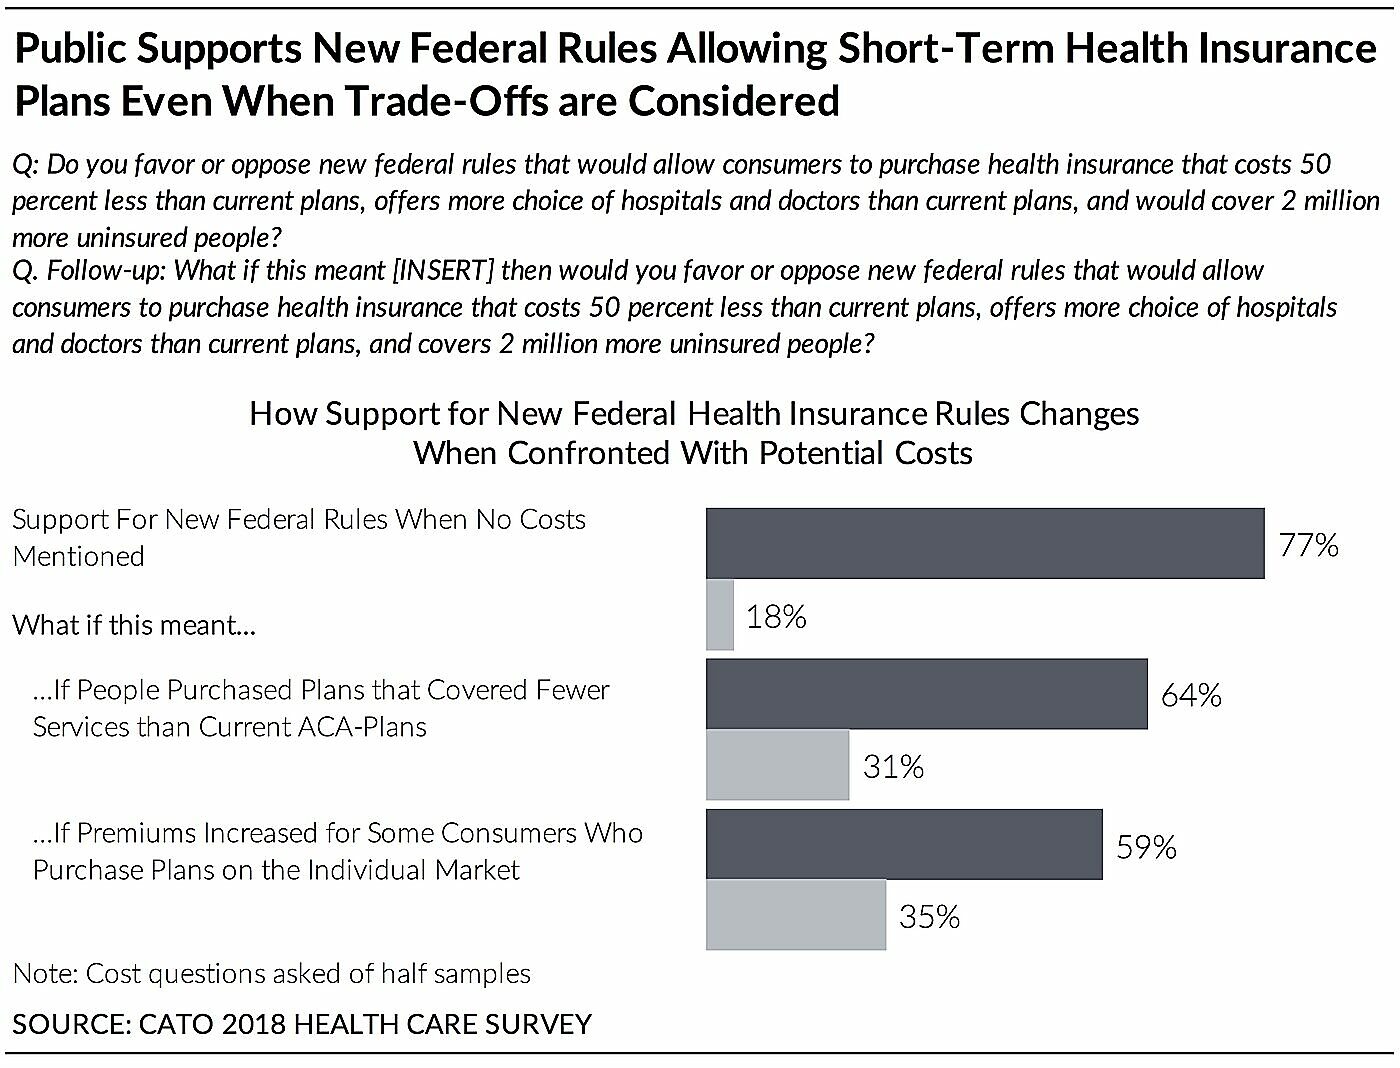 Public Supports New Federal Rules Allowing Short-Term Health Insurance Plans Even When Trade-Offs Are Considered